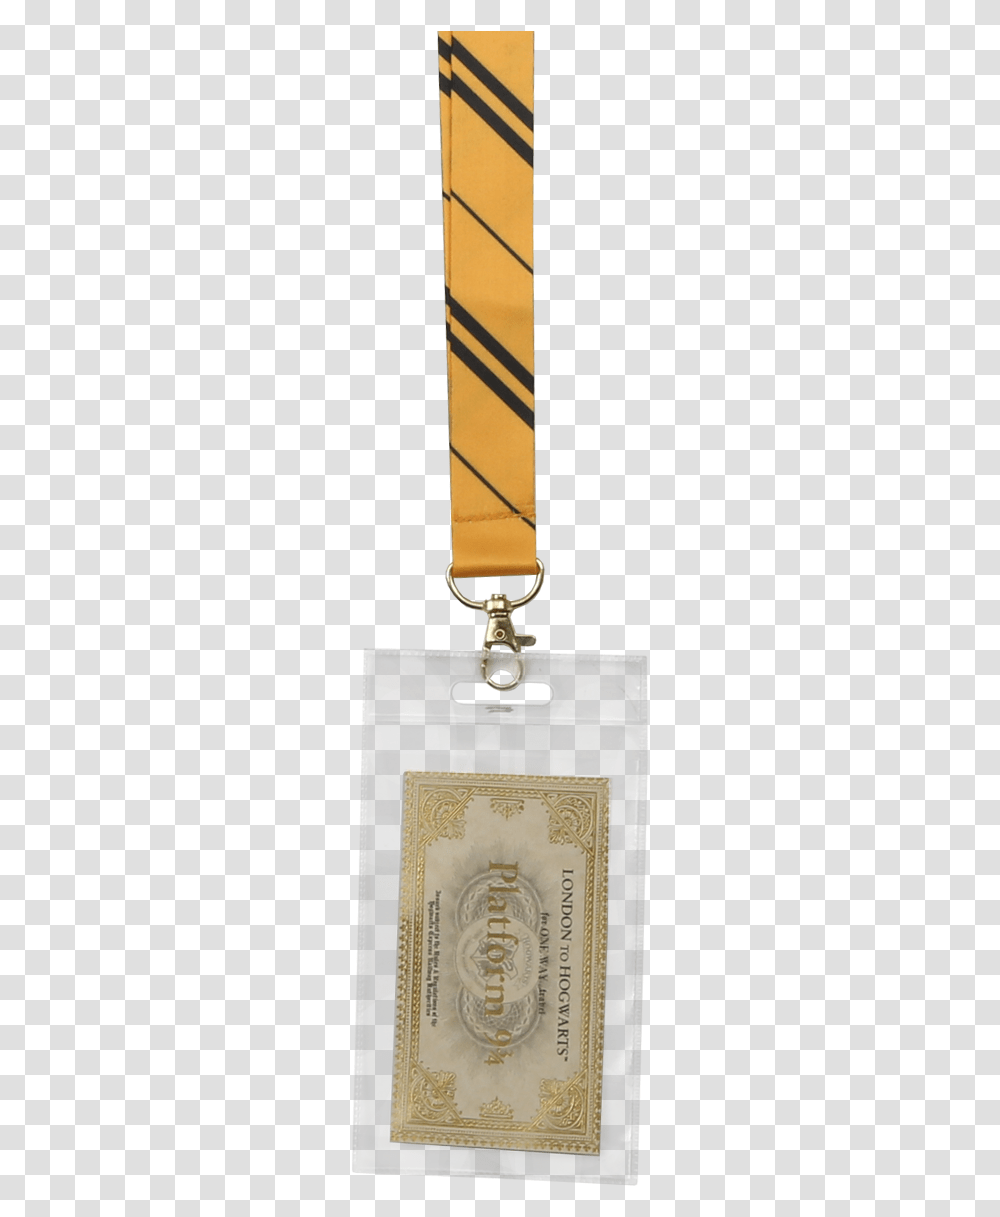 Hufflepuff House Tie Lanyard Ticket002 V Coin Purse, Gold, Crystal Transparent Png